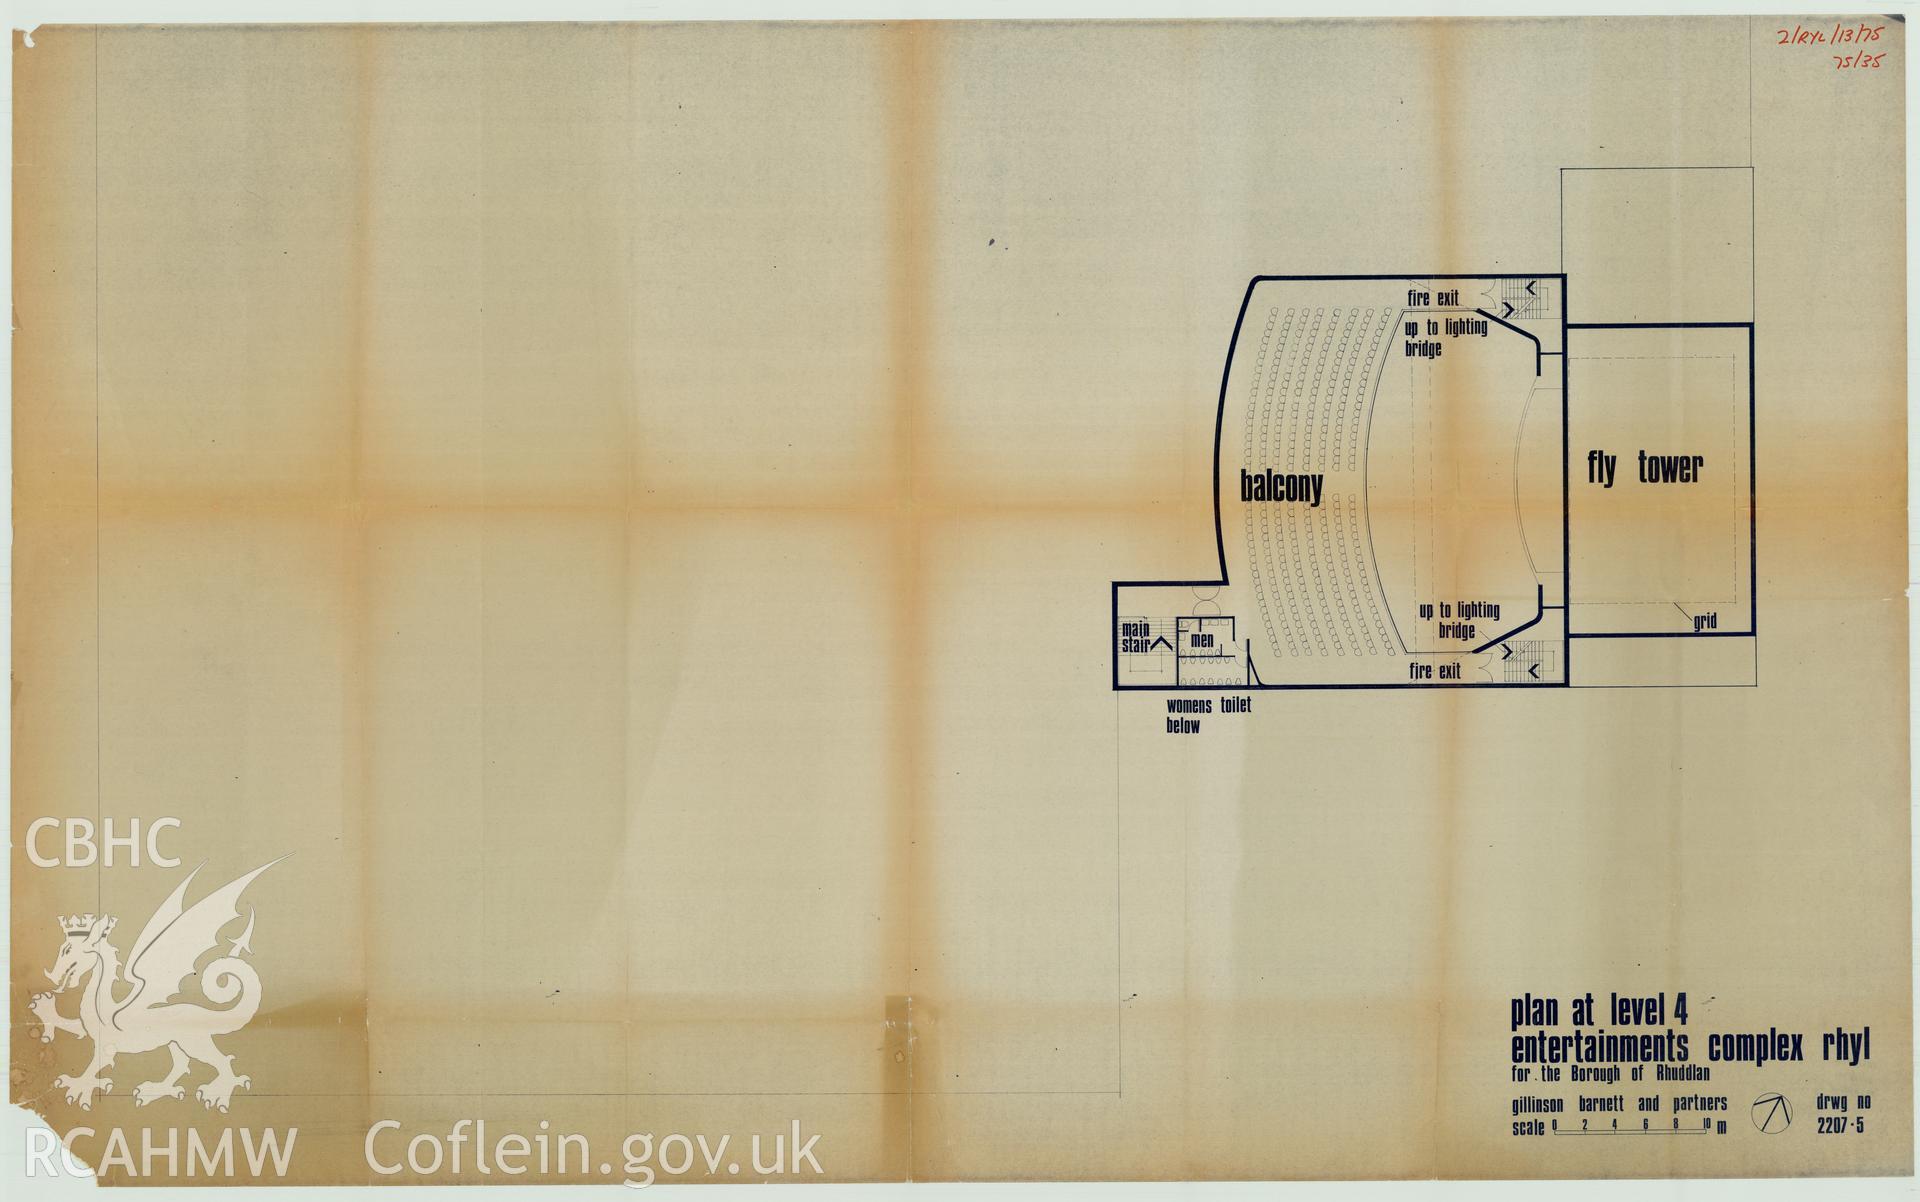 Digital copy of a measured drawing showing plans of level 4 of the Sun Centre, Rhyl, produced by Gillinson Barnett and Partners. Loaned for copying by Denbighshire County Council.